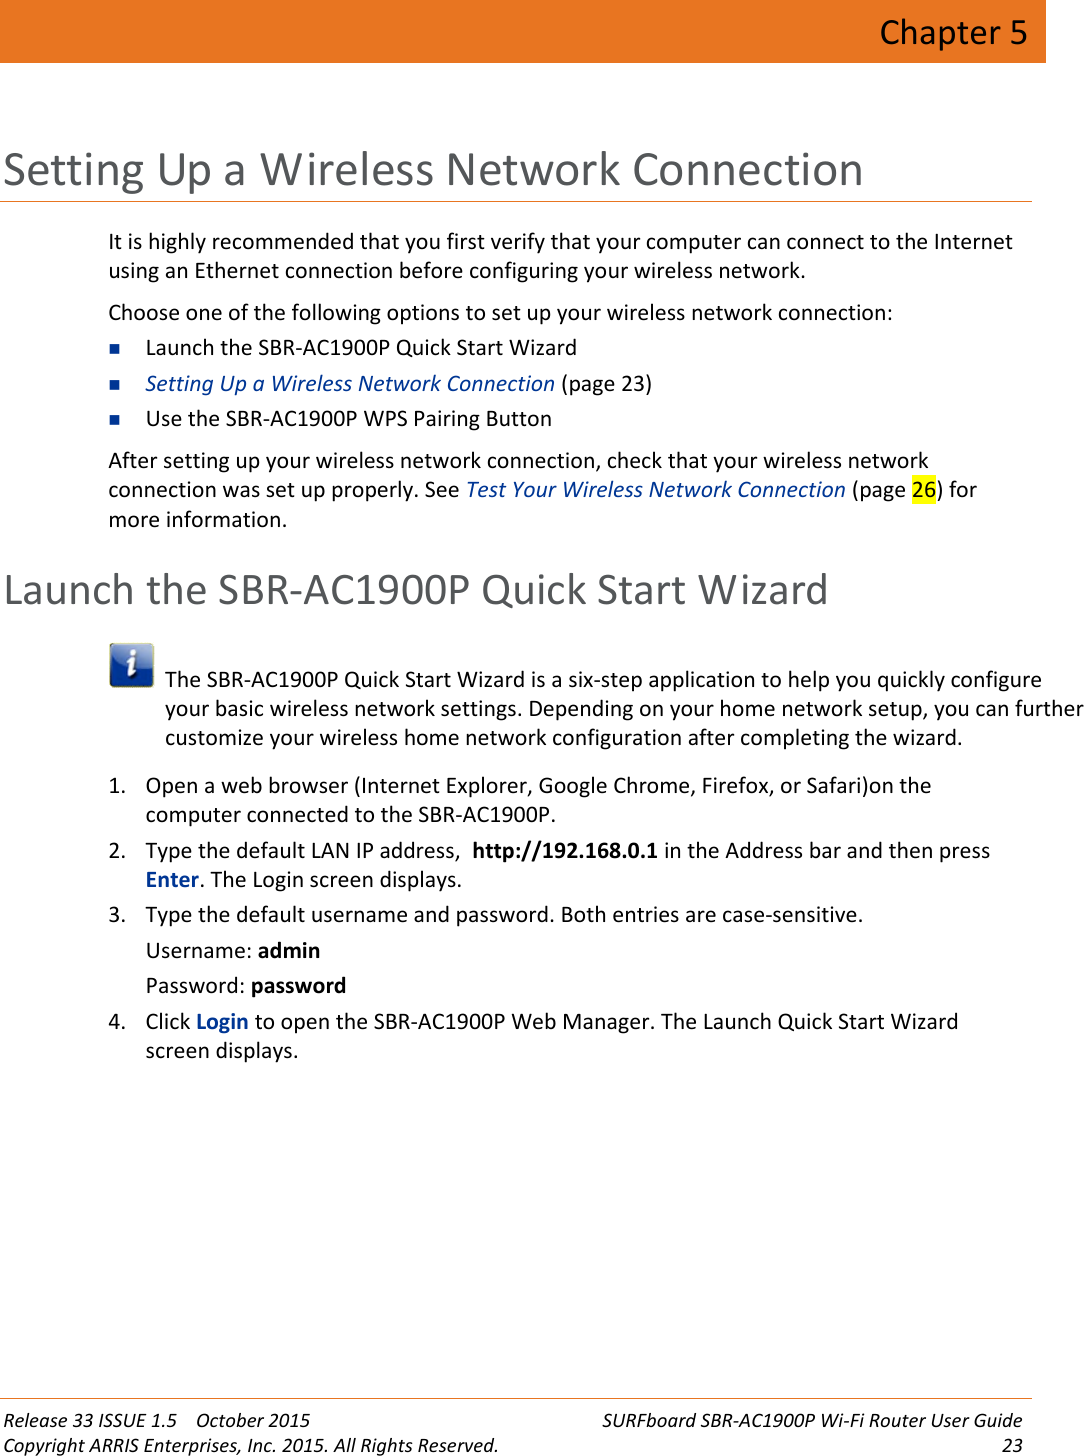 Release 33 ISSUE 1.5 October 2015 SURFboard SBR-AC1900P Wi-Fi Router User GuideCopyright ARRIS Enterprises, Inc. 2015. All Rights Reserved. 23Chapter 5Setting Up a Wireless Network ConnectionIt is highly recommended that you first verify that your computer can connect to the Internetusing an Ethernet connection before configuring your wireless network.Choose one of the following options to set up your wireless network connection:Launch the SBR-AC1900P Quick Start WizardSetting Up a Wireless Network Connection (page 23)Use the SBR-AC1900P WPS Pairing ButtonAfter setting up your wireless network connection, check that your wireless networkconnection was set up properly. See Test Your Wireless Network Connection (page 26) formore information.Launch the SBR-AC1900P Quick Start WizardThe SBR-AC1900P Quick Start Wizard is a six-step application to help you quickly configureyour basic wireless network settings. Depending on your home network setup, you can furthercustomize your wireless home network configuration after completing the wizard.1. Open a web browser (Internet Explorer, Google Chrome, Firefox, or Safari)on thecomputer connected to the SBR-AC1900P.2. Type the default LAN IP address, http://192.168.0.1 in the Address bar and then pressEnter. The Login screen displays.3. Type the default username and password. Both entries are case-sensitive.Username: adminPassword: password4. Click Login to open the SBR-AC1900P Web Manager. The Launch Quick Start Wizardscreen displays.